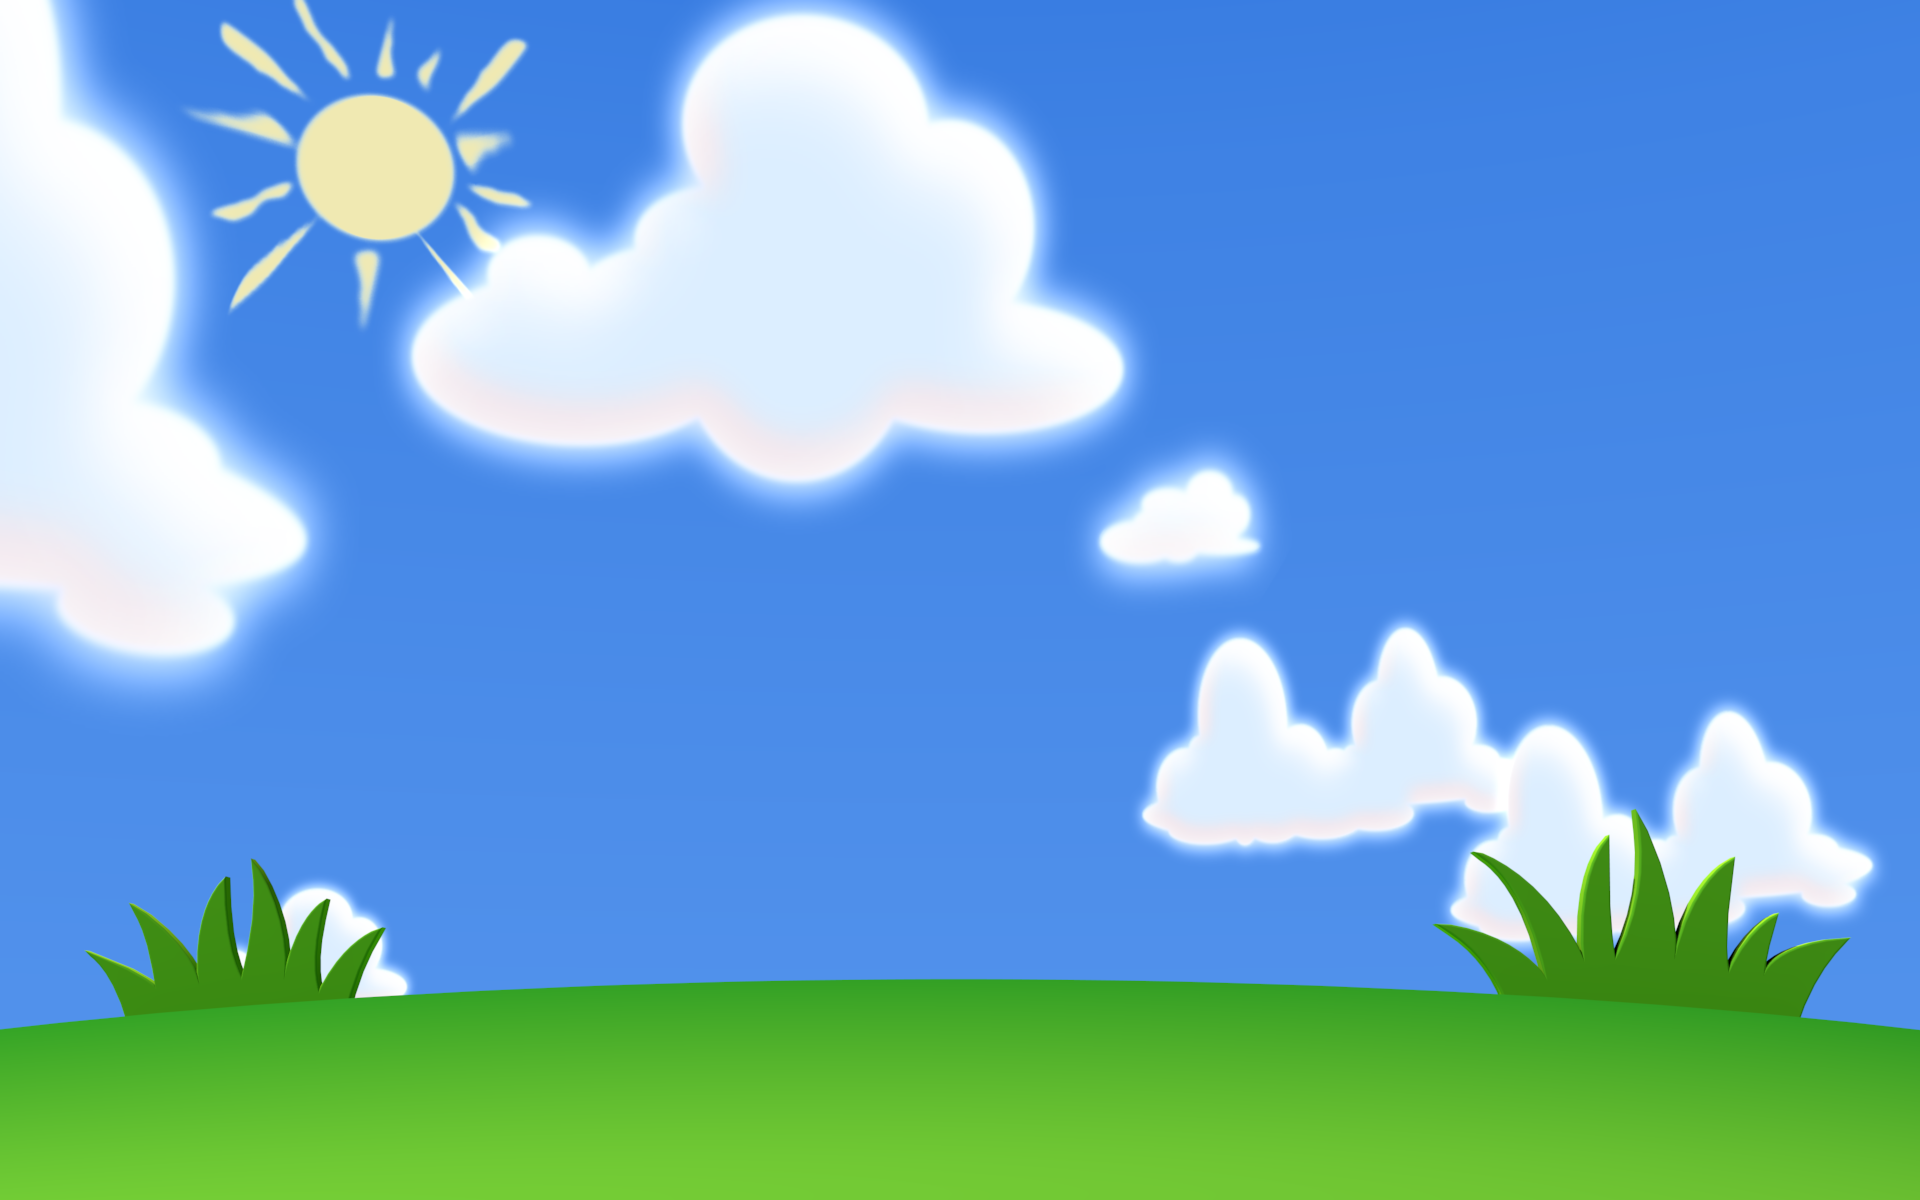 clipart background images - photo #7